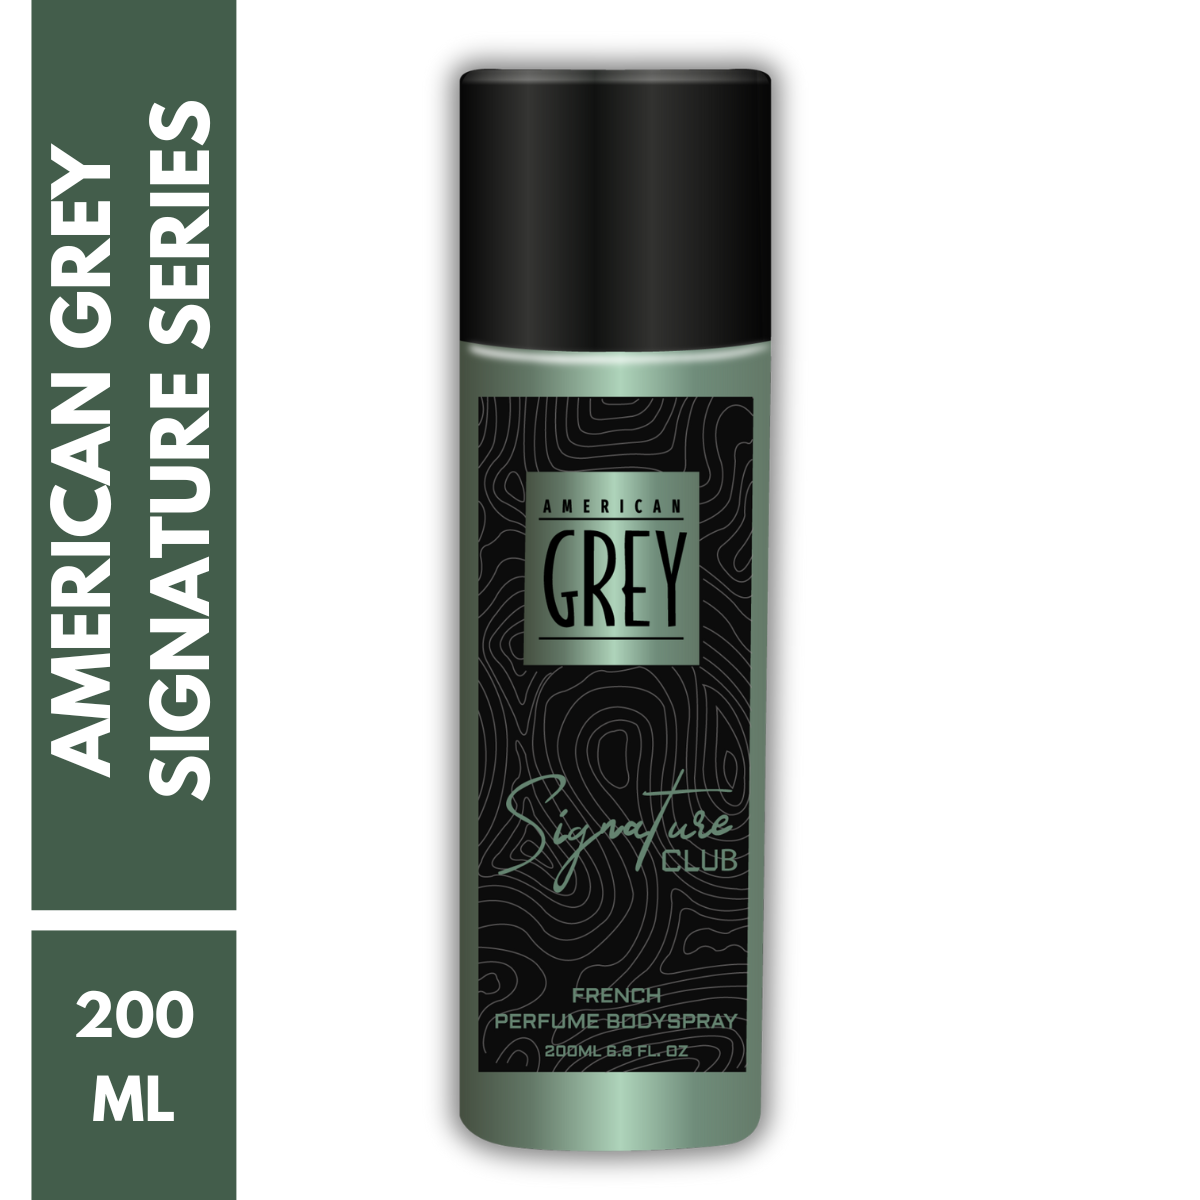 american grey signature club, signature club deo for men, patchouli deo for men, fragrance deo for men, vetiver smelling deo for men, long lasting deo for men,  Sauvage Dior dupe, Sauvage Dior replica, Sauvage Dior deo spray, deo for men, deodorant for men, top deodorant for men, men deodorants at best price, buy deodorant for men online, best long lasting deo for men, best long lasting deodorant in india for male 2023, American grey deo, American grey signature series, signature club deo, deo for him, deo for guys, deo for boyfriend, deo for BF, deo for BFF, men grooming essential, men fragrance for winter season, best deo for cold weather, best deo for autumn weather, popular winter deodorant for men, best smelling deo for winter season, popular evening wear, best smelling deo for autumn season